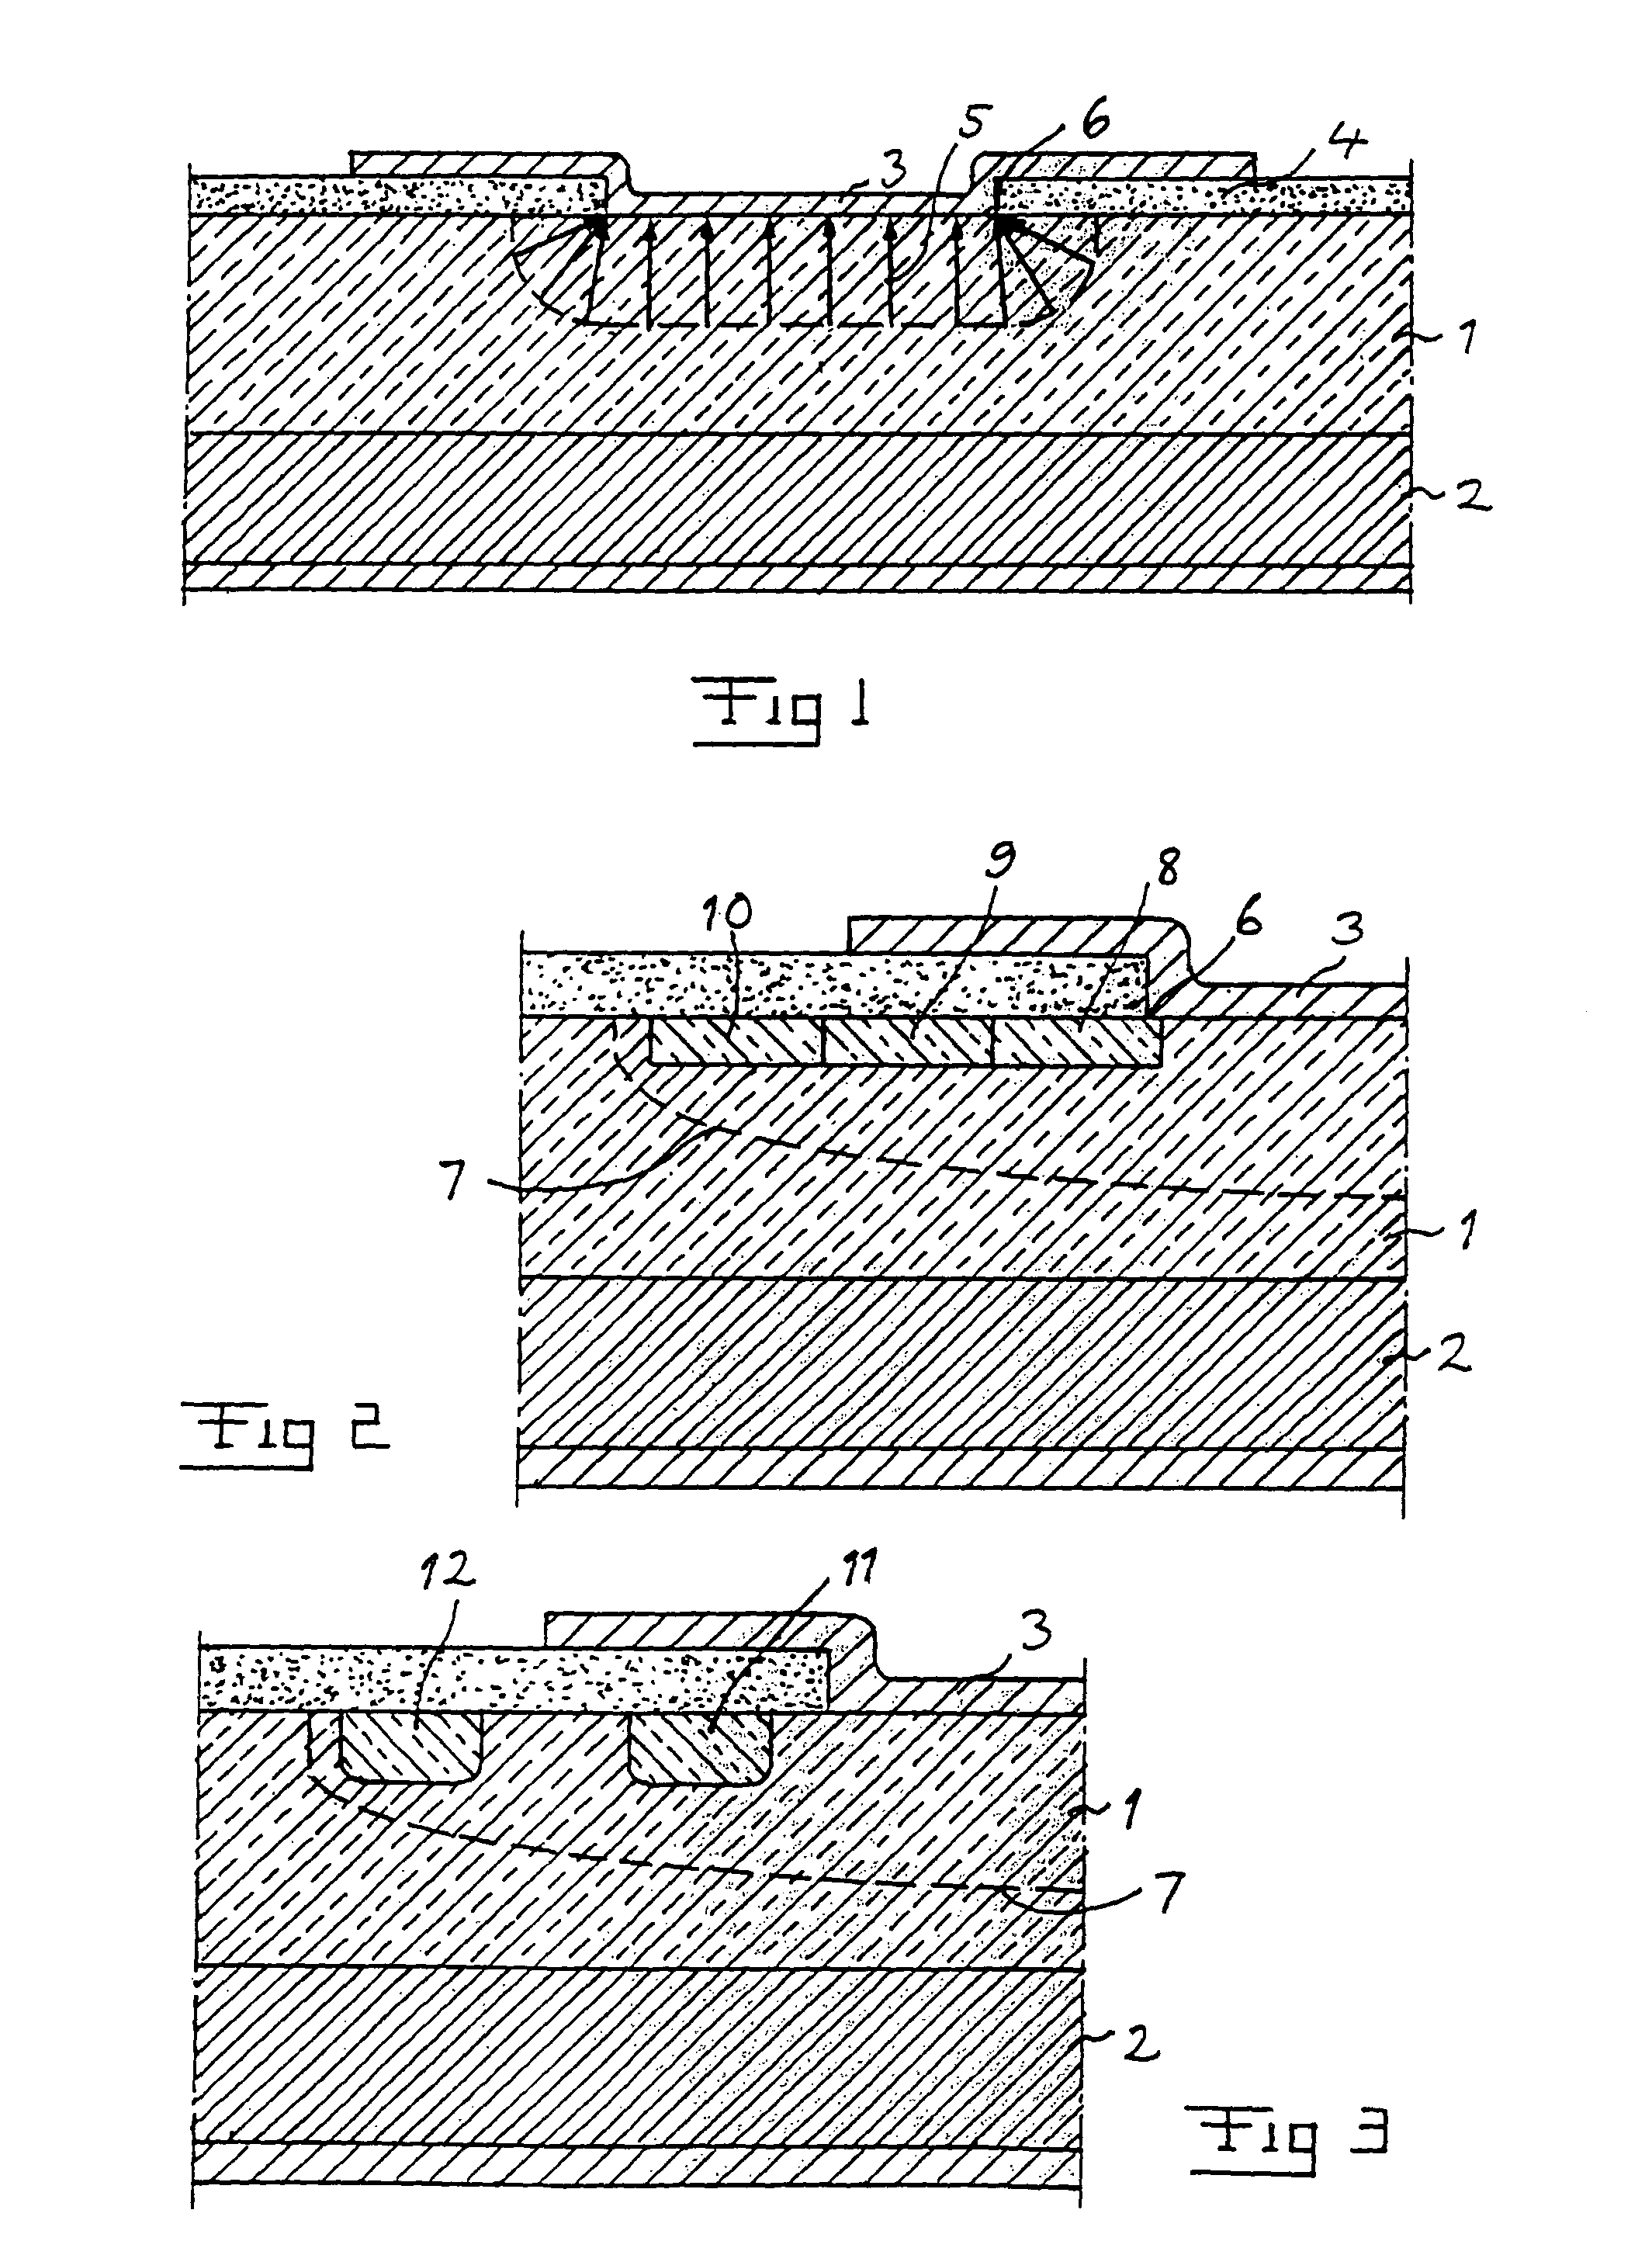 Semiconductor device comprising a junction having a plurality of rings